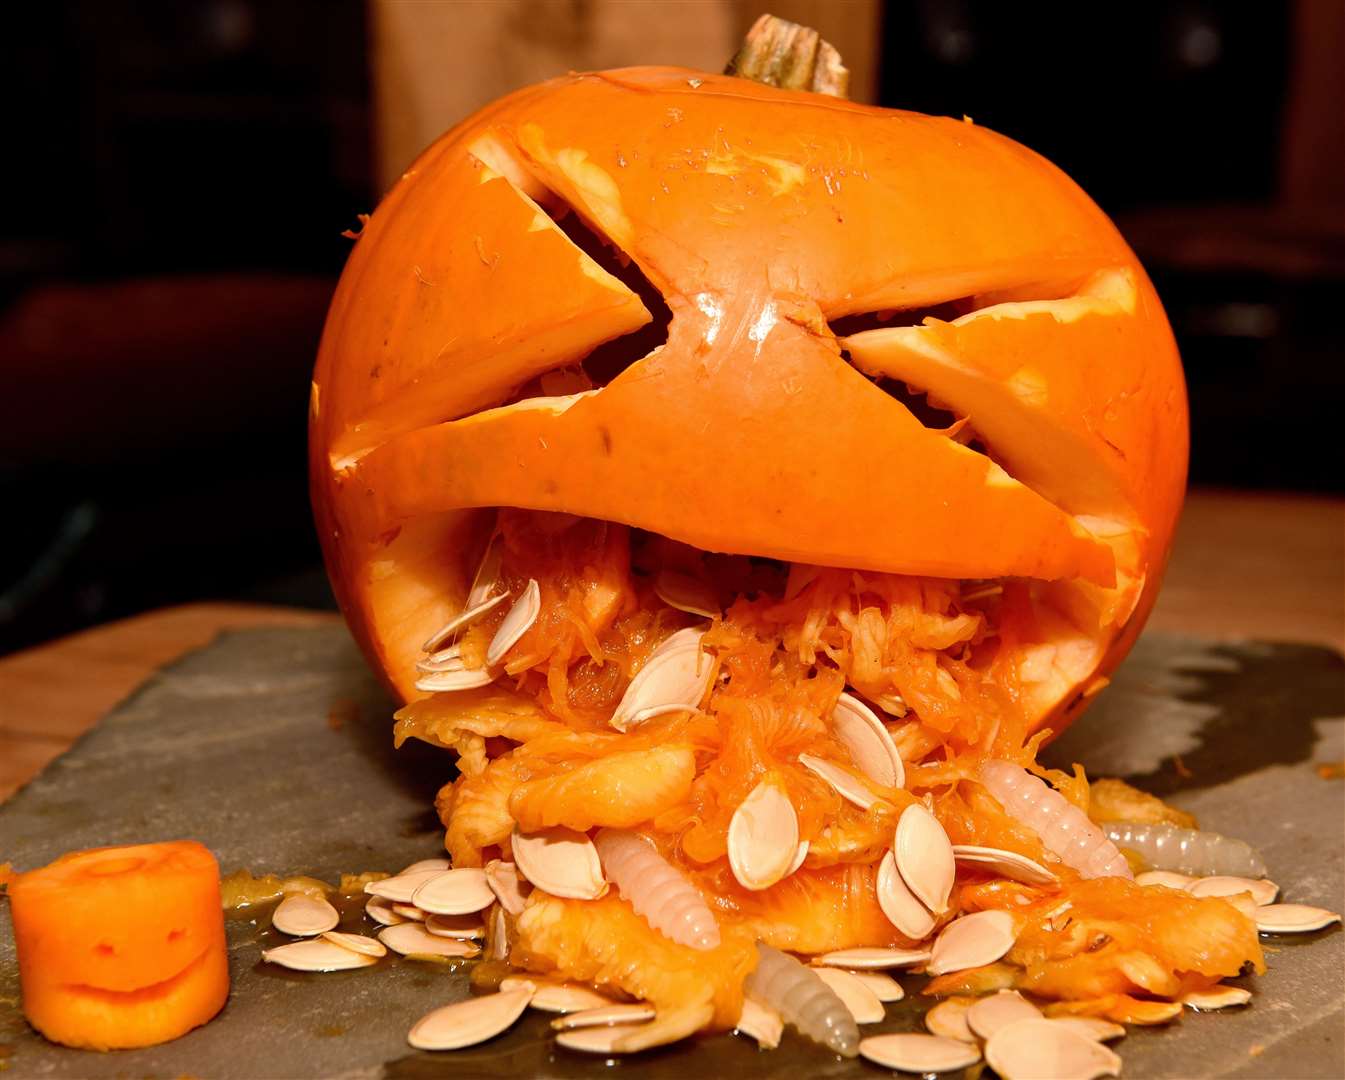 Take out the pumpkin seeds and flesh and leave a dry cavity if you want your carving to last